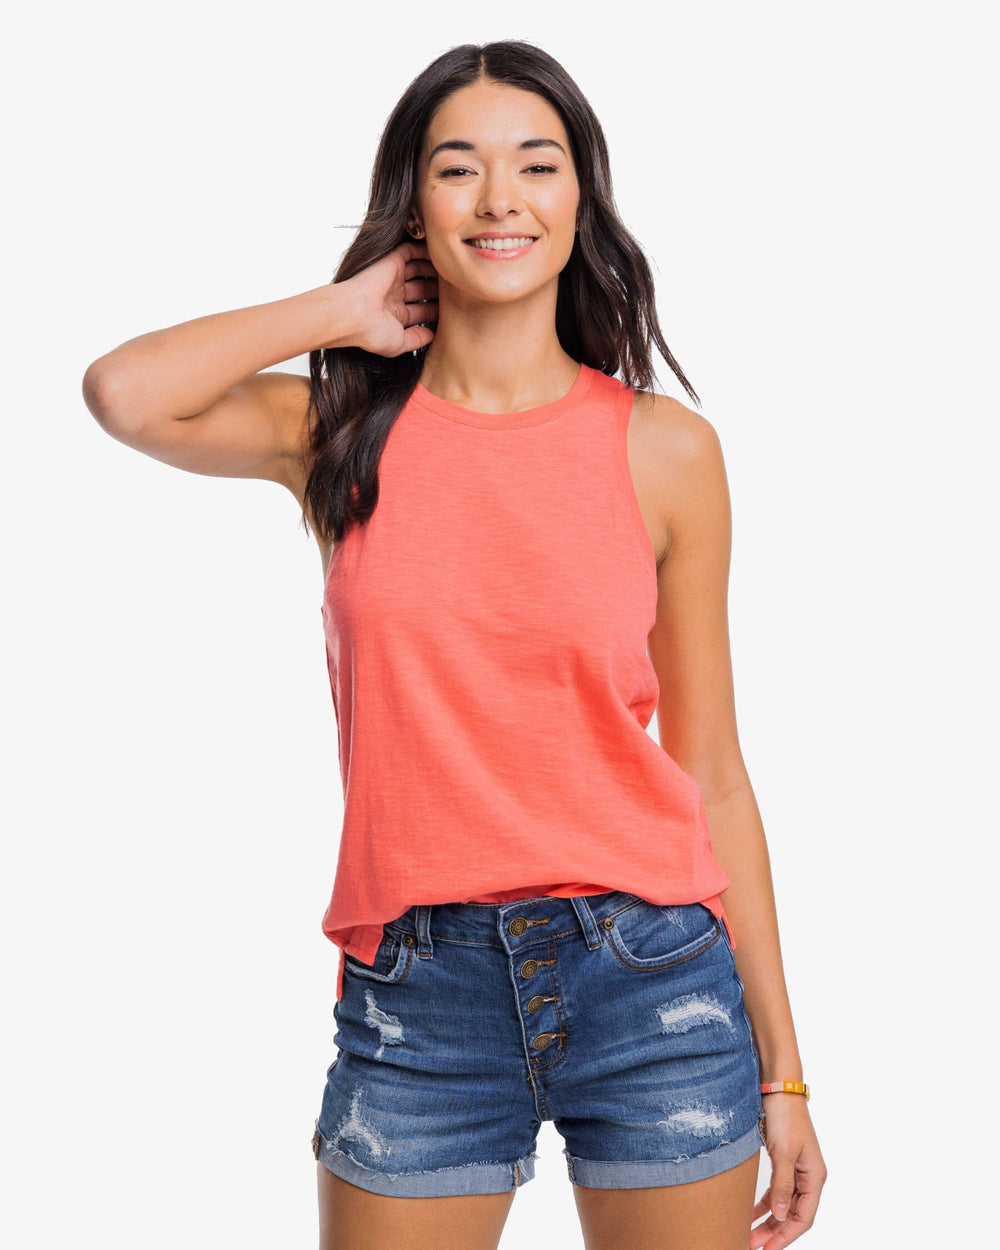 The front view of the Southern Tide Avah Sun Farer Tank by Southern Tide - Sunkist Coral